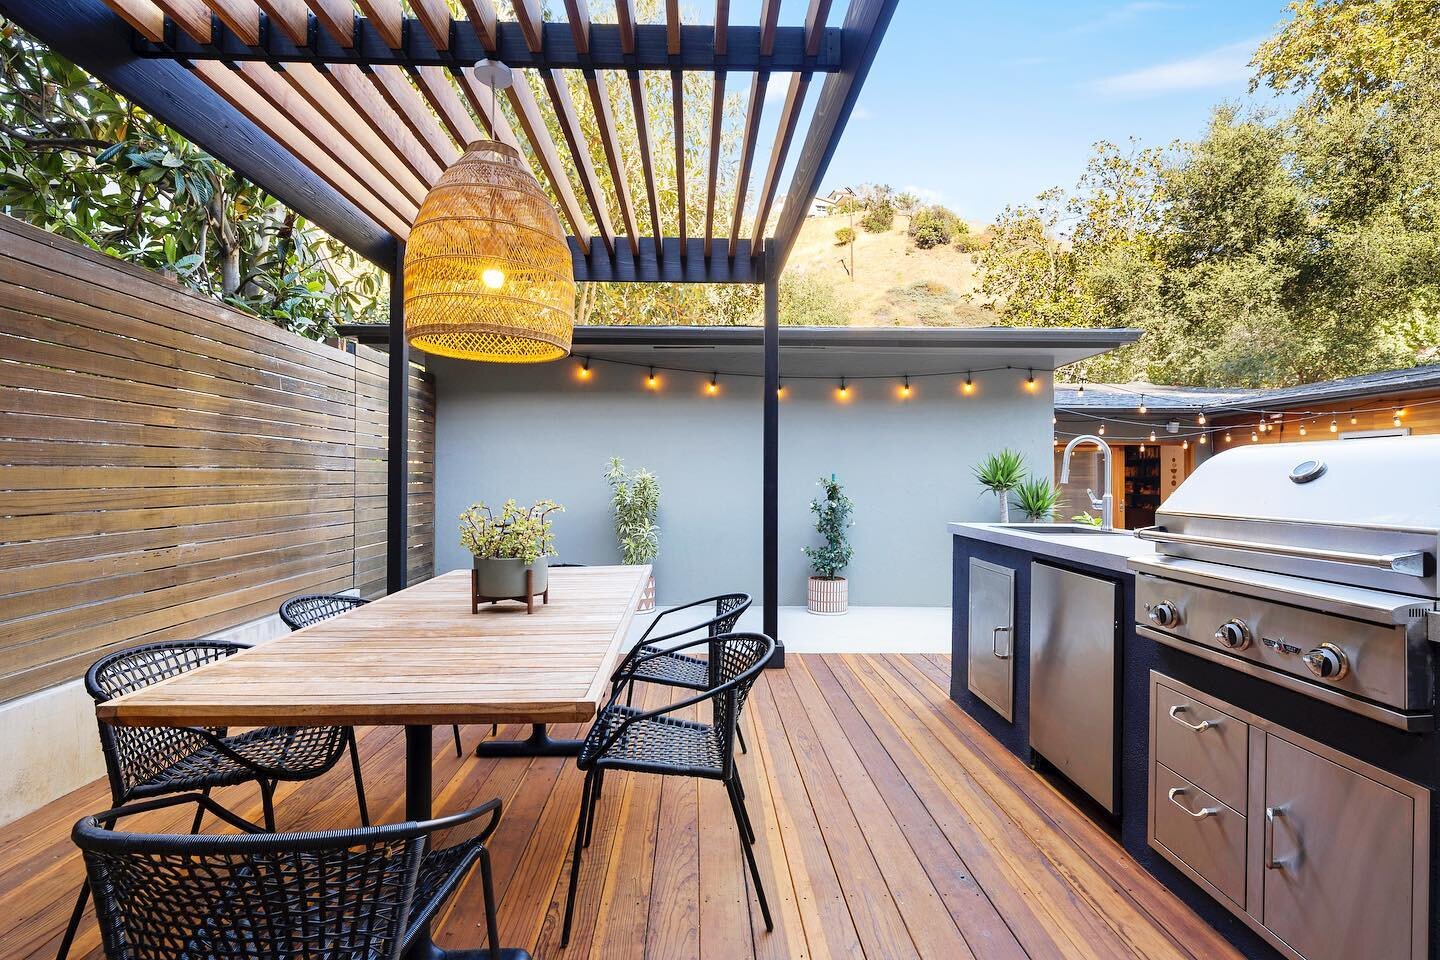 The Al fresco kitchen of our dreams from our Hollywood Canyon project. This #californialiving space is all about entertaining! ⁣

#californiadreamin #californialife #californialove #decor #garden #homedesign #interior #interiordecor #interiordesign #